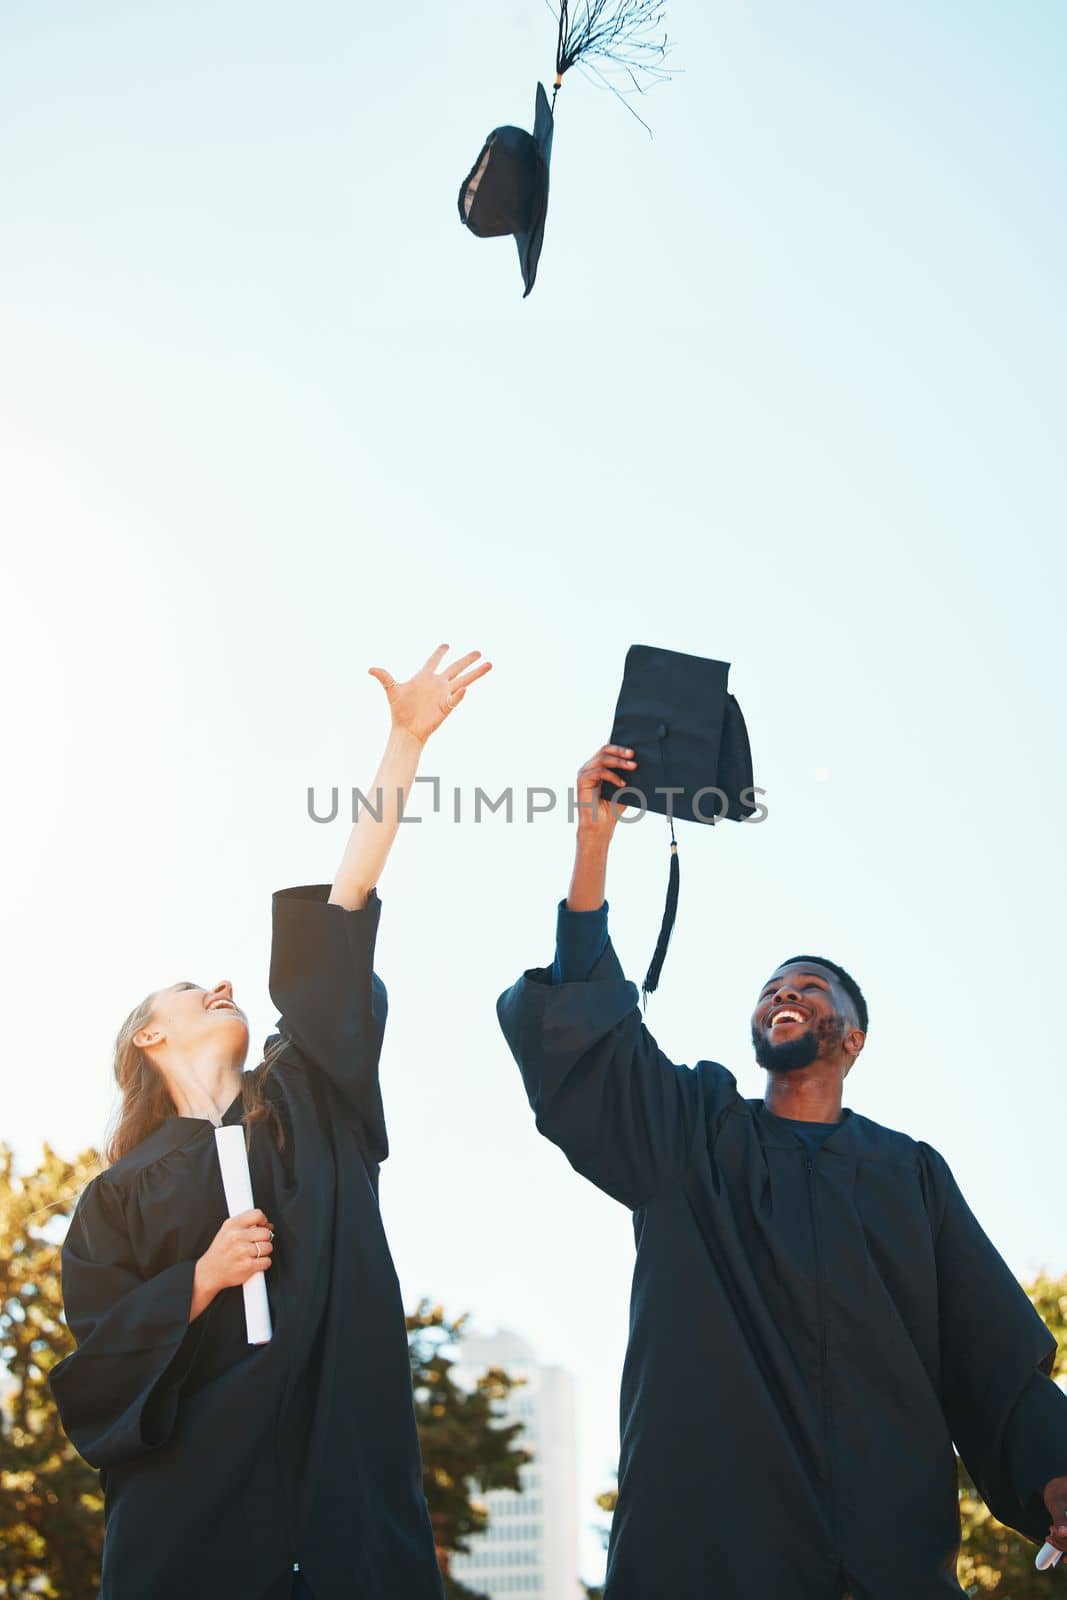 University, graduation and students with graduation cap in air for celebration, happiness and joy. College, education and man and woman throw hats after achievement of degree, diploma and certificate.